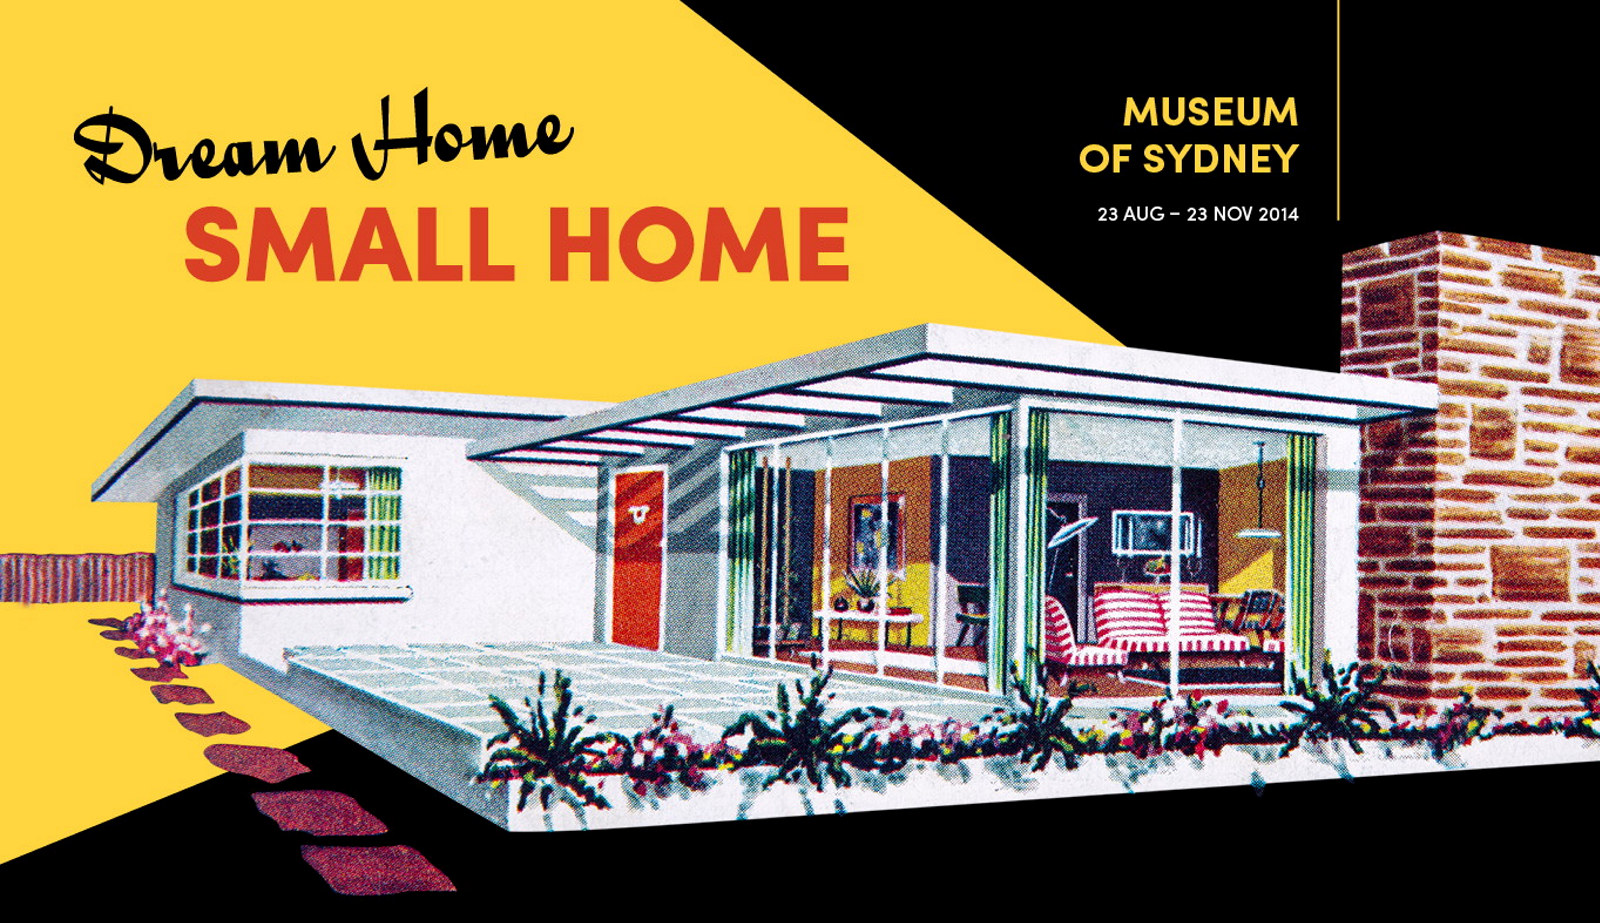 Dream Home - Small Home. On now at Museum of Sydney